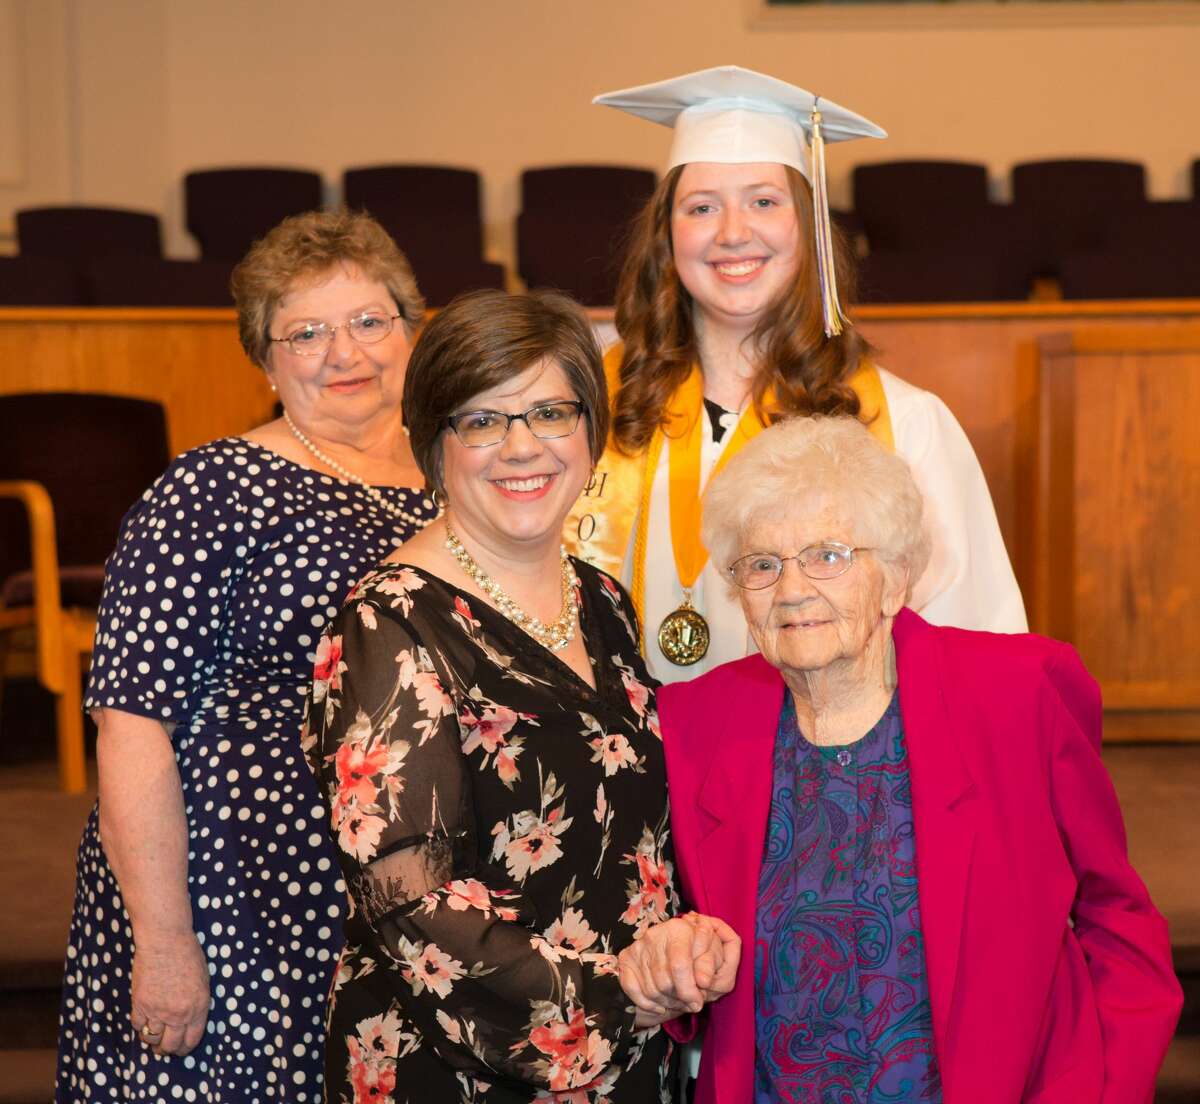 From left: Sharon McClain, Amy Kellogg, Emily Kellogg and Donna Scott pose for a portrait following Calvary Baptists Academy graduation. All four women were valedictorians of their high school class.